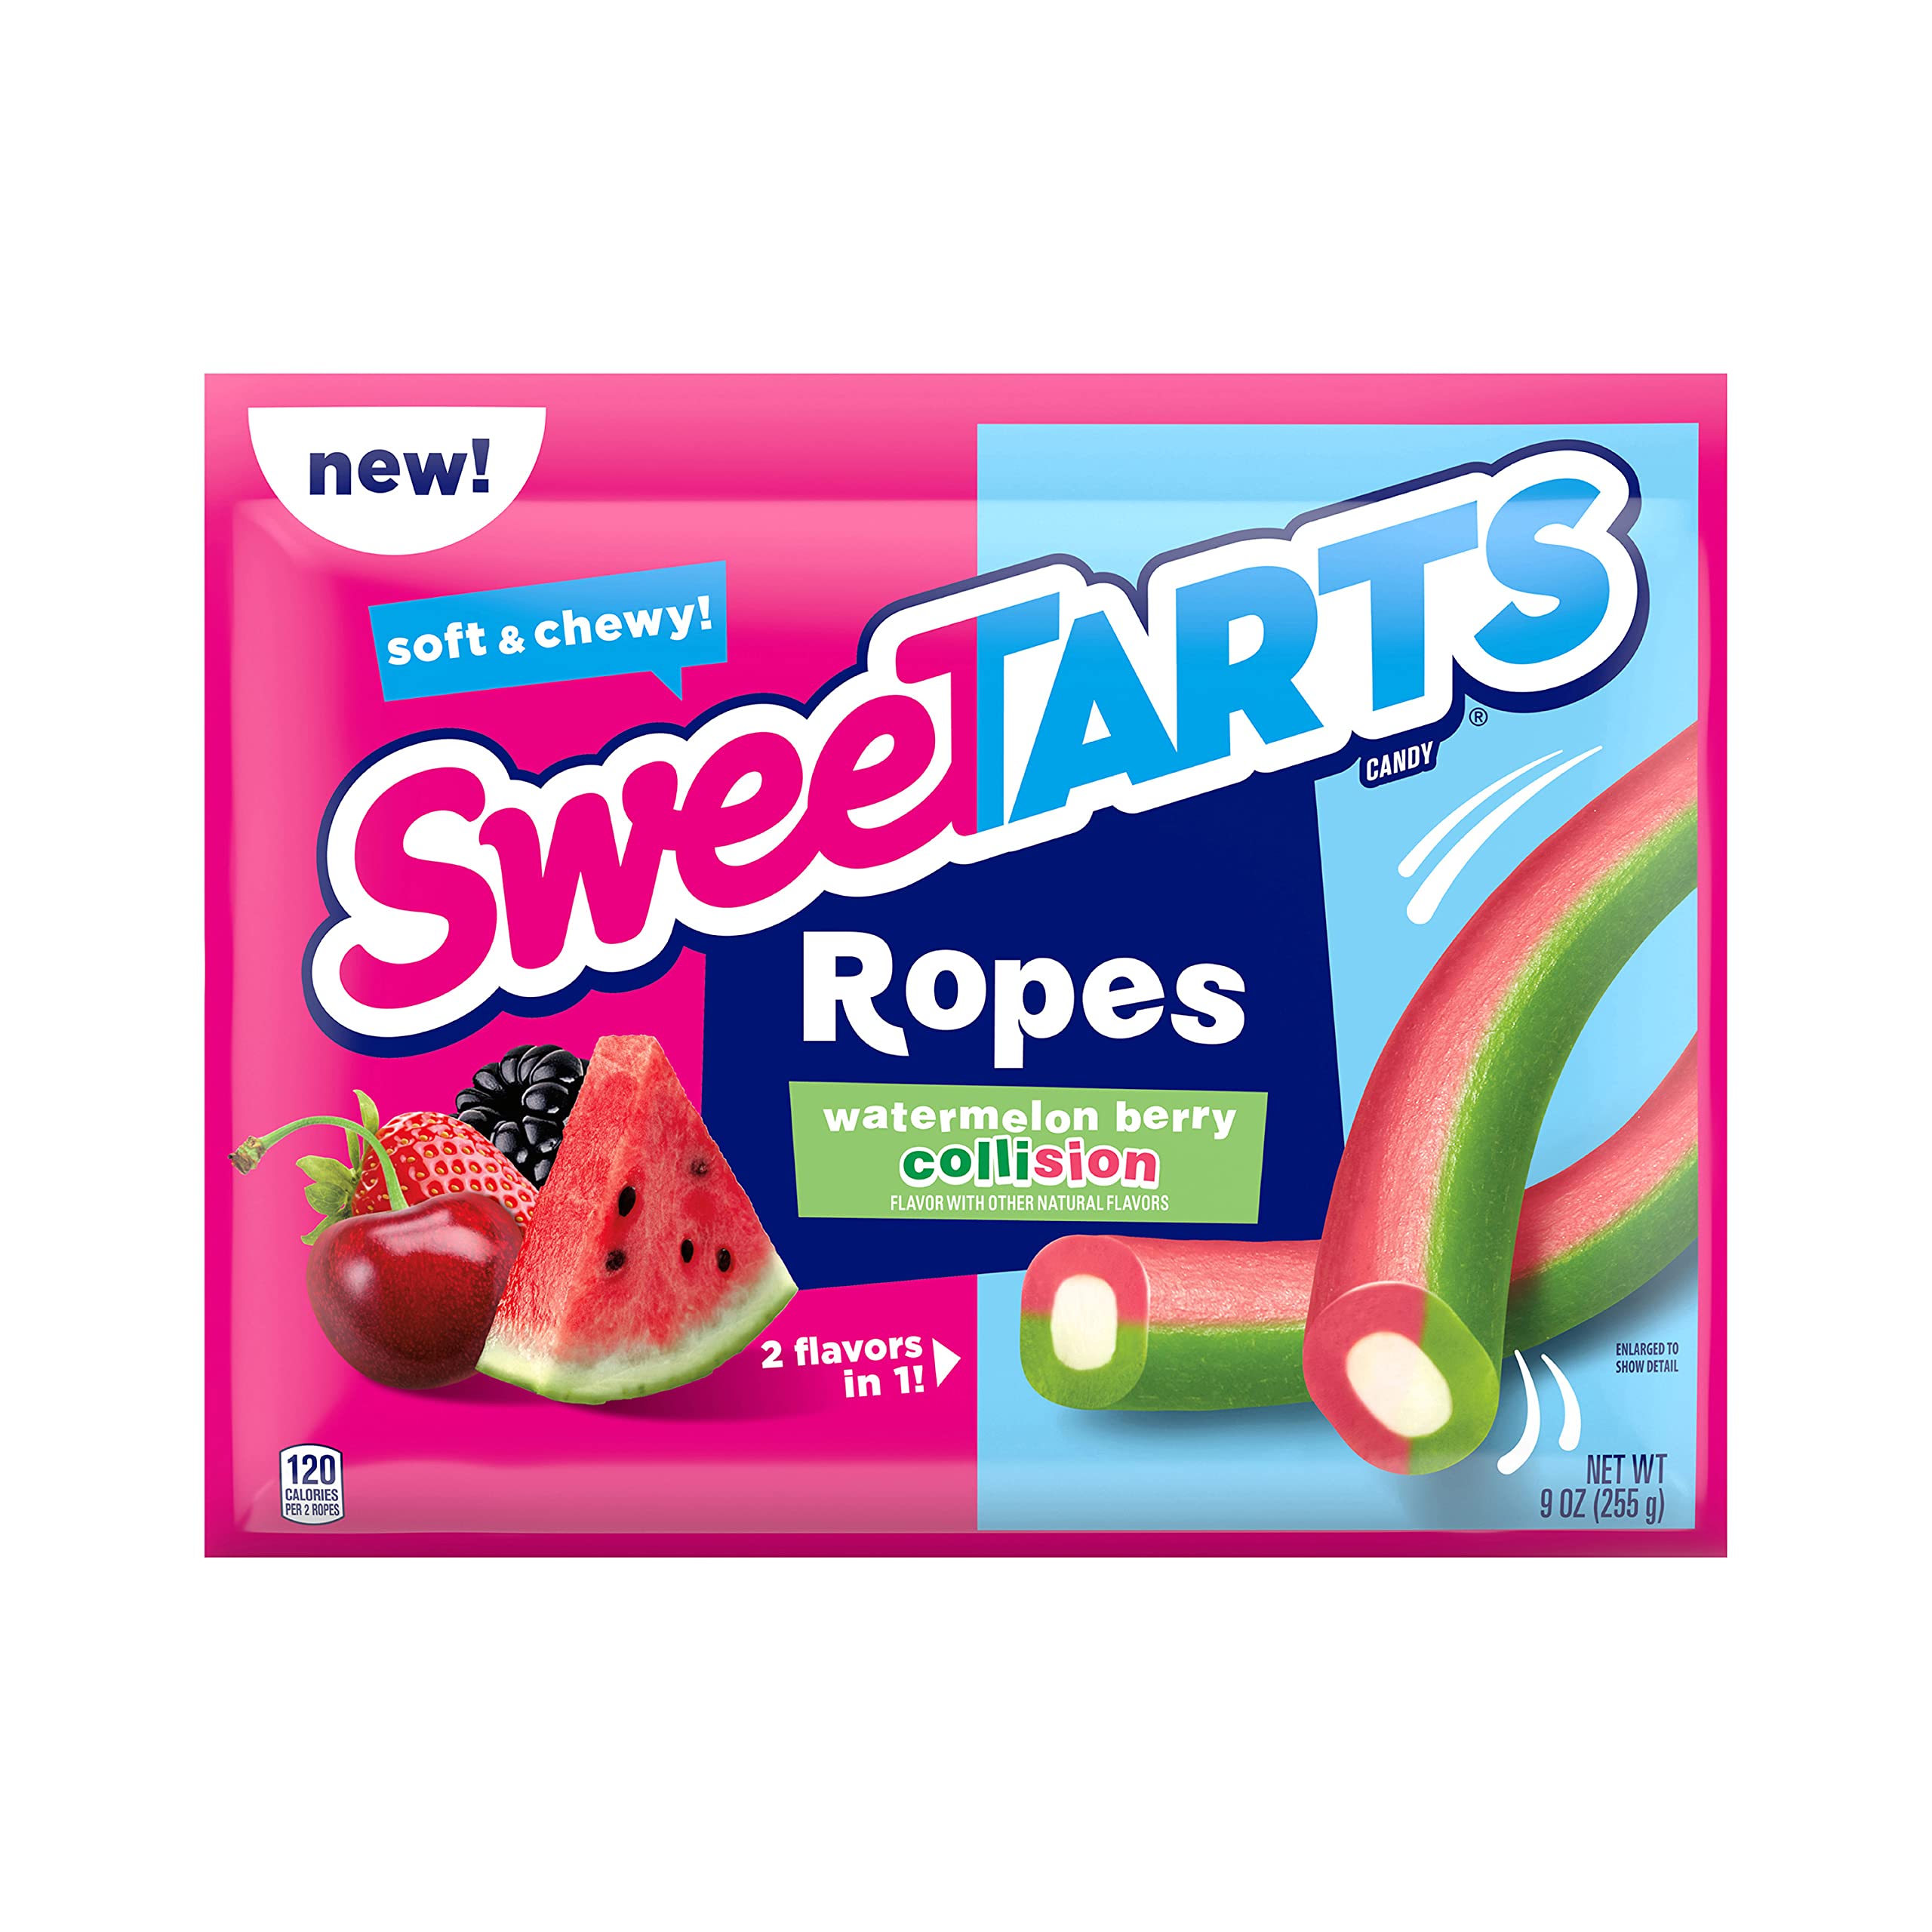 9oz SweeTARTS Ropes Candy, Watermelon Berry Collision $2.99 shipped w/ Prime